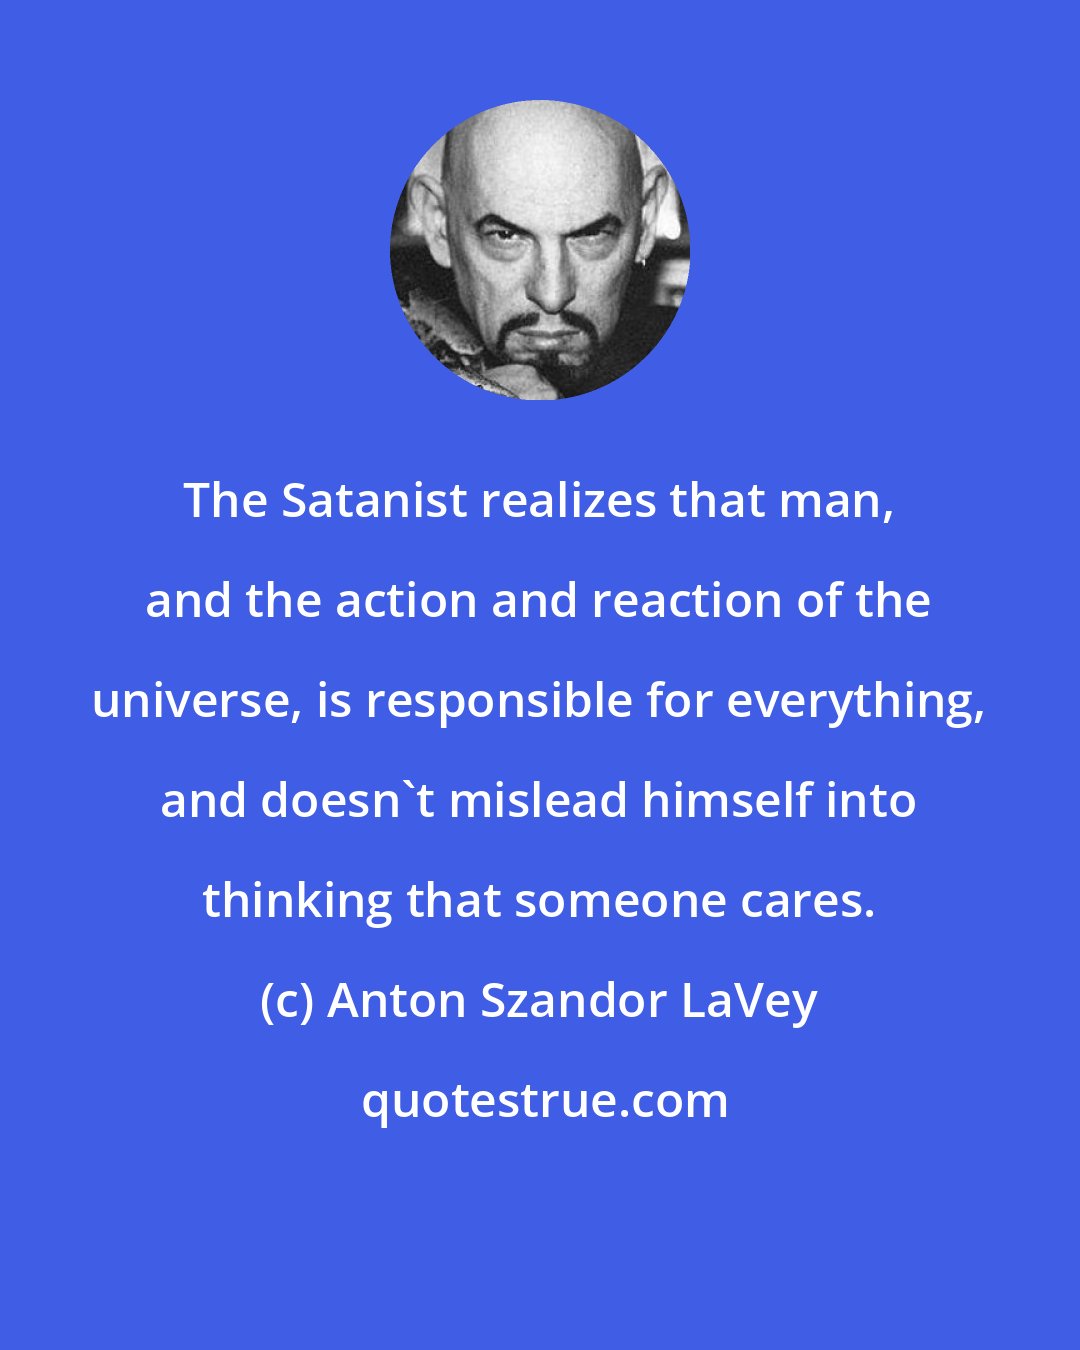 Anton Szandor LaVey: The Satanist realizes that man, and the action and reaction of the universe, is responsible for everything, and doesn't mislead himself into thinking that someone cares.